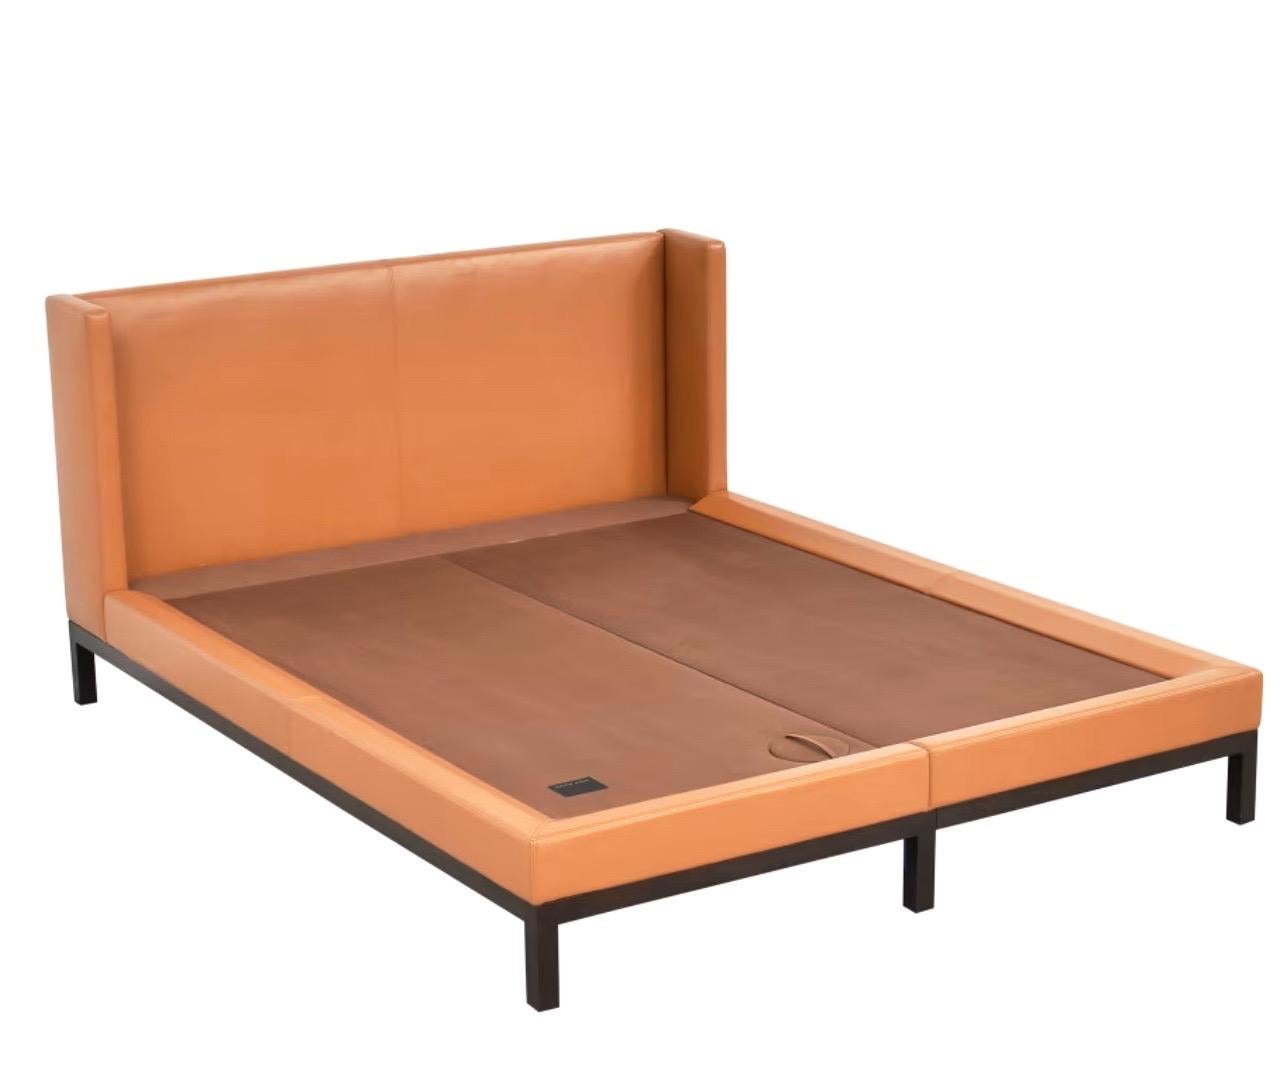 Christian Liaigre Saddle Leather Omen Bed, Queen/Double, France, c. 1994. Rare piece. No longer in production.  Available for special order from time to time from Maison Liaigre, France.  This piece dates to Liaigre’s production prior to his work